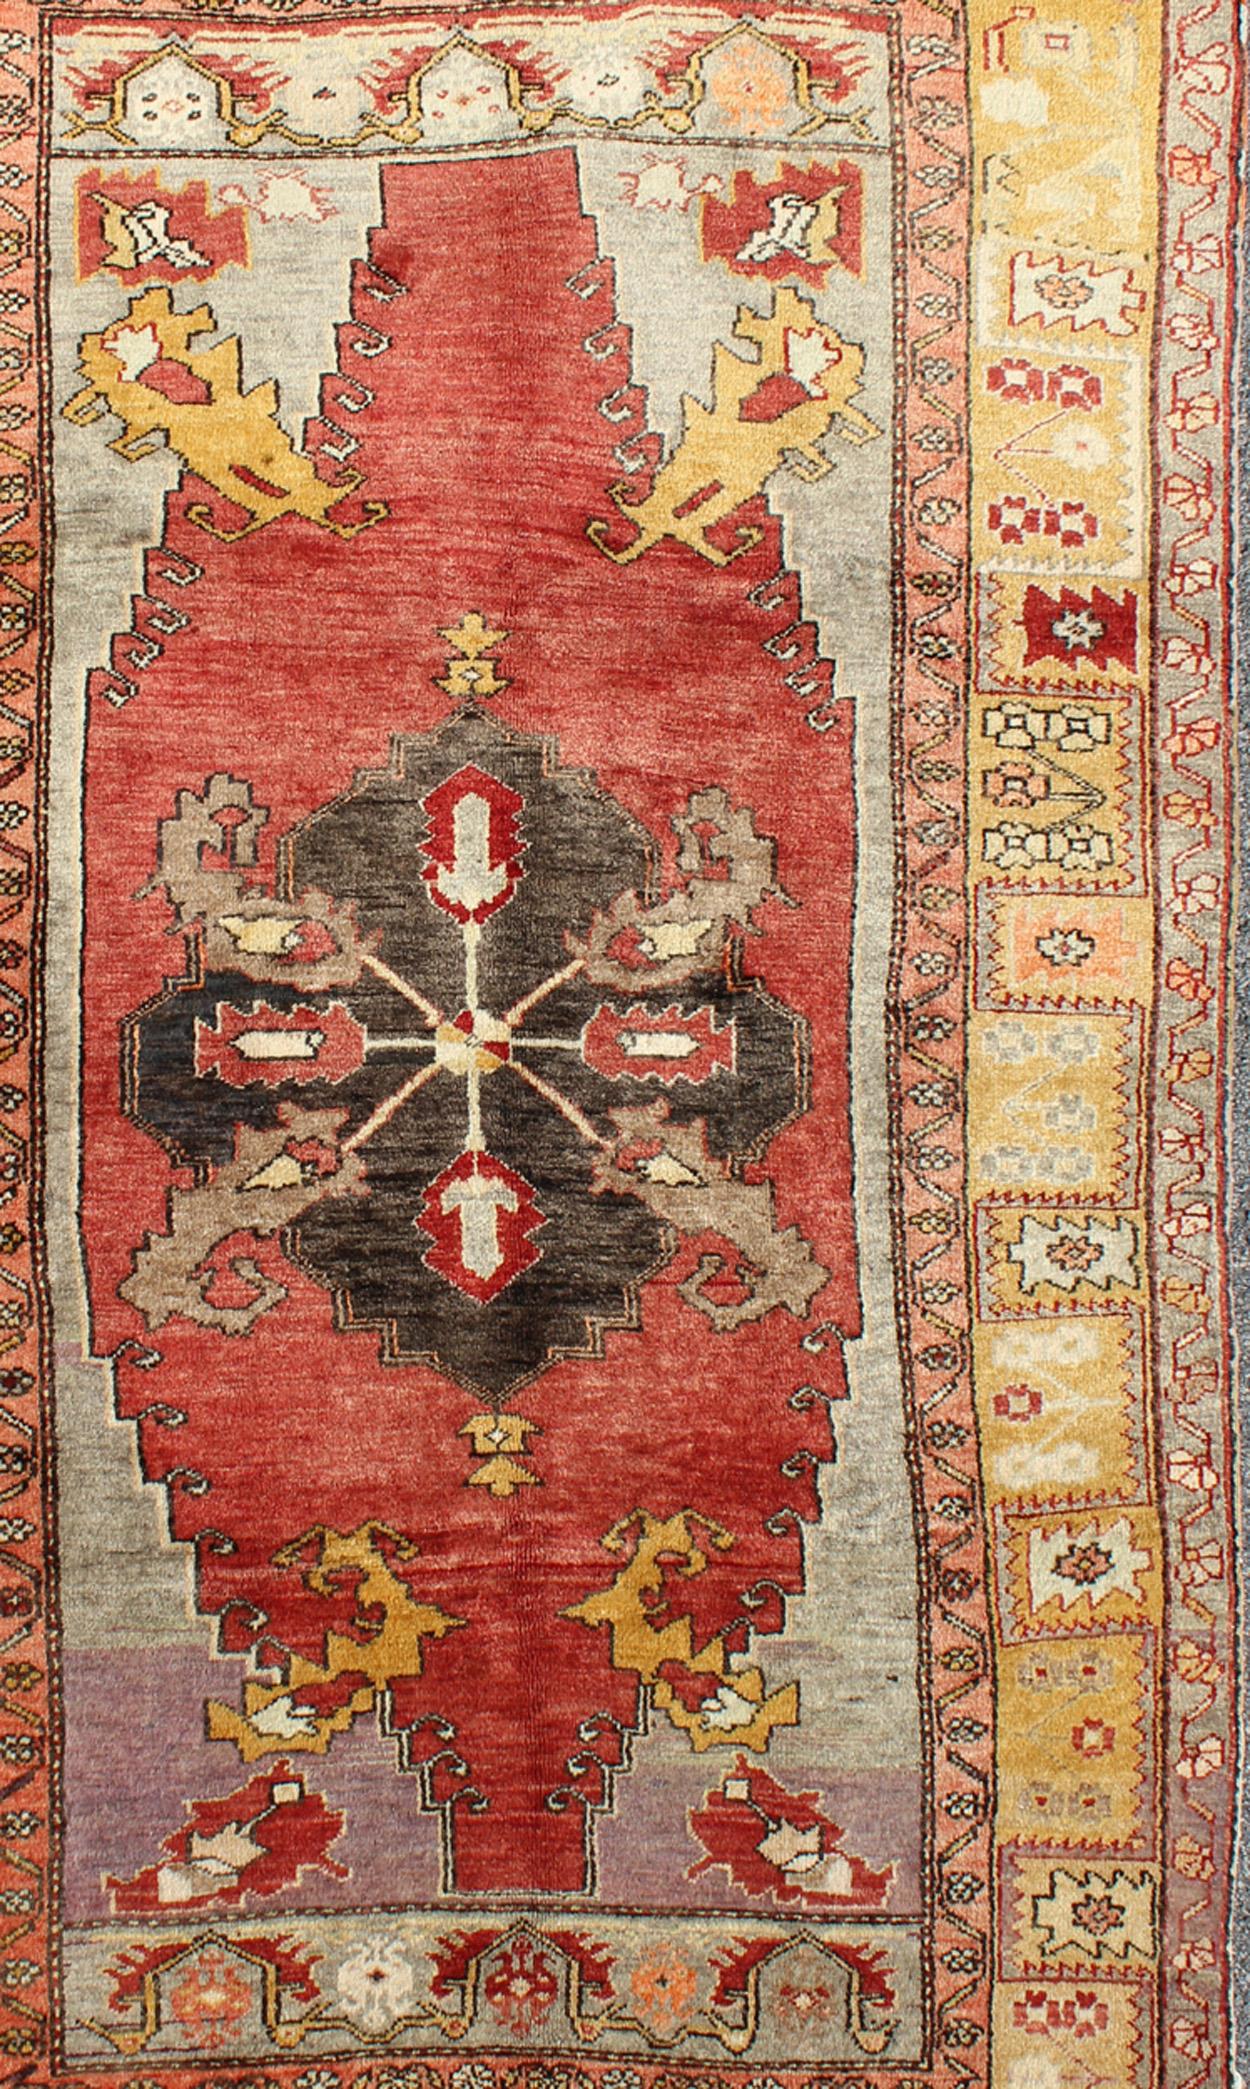 Measures: 4'8 x 8'7

This beautiful Turkish Oushak is unique in its color palette. The center medallion features a combination of black, brown, gold, red and light purple. The border has intense gold and yellow toned floral crests.

Country of